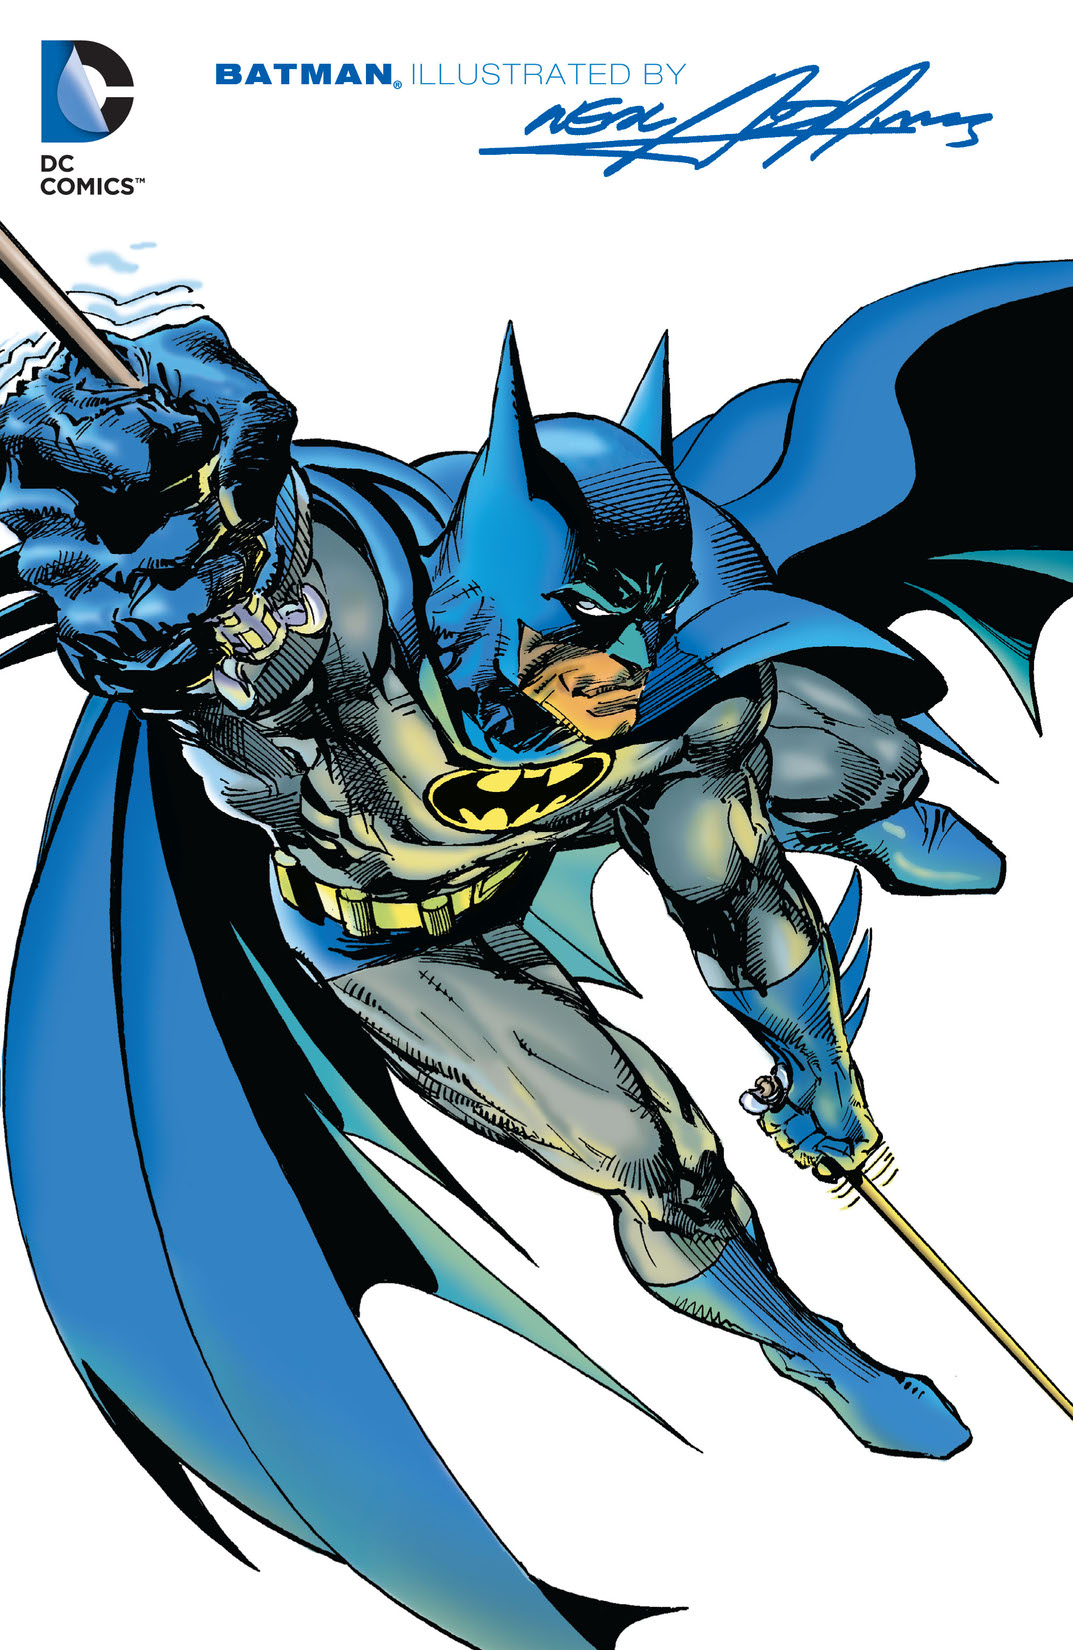 Batman: Illustrated by Neal Adams Vol. 2 preview images